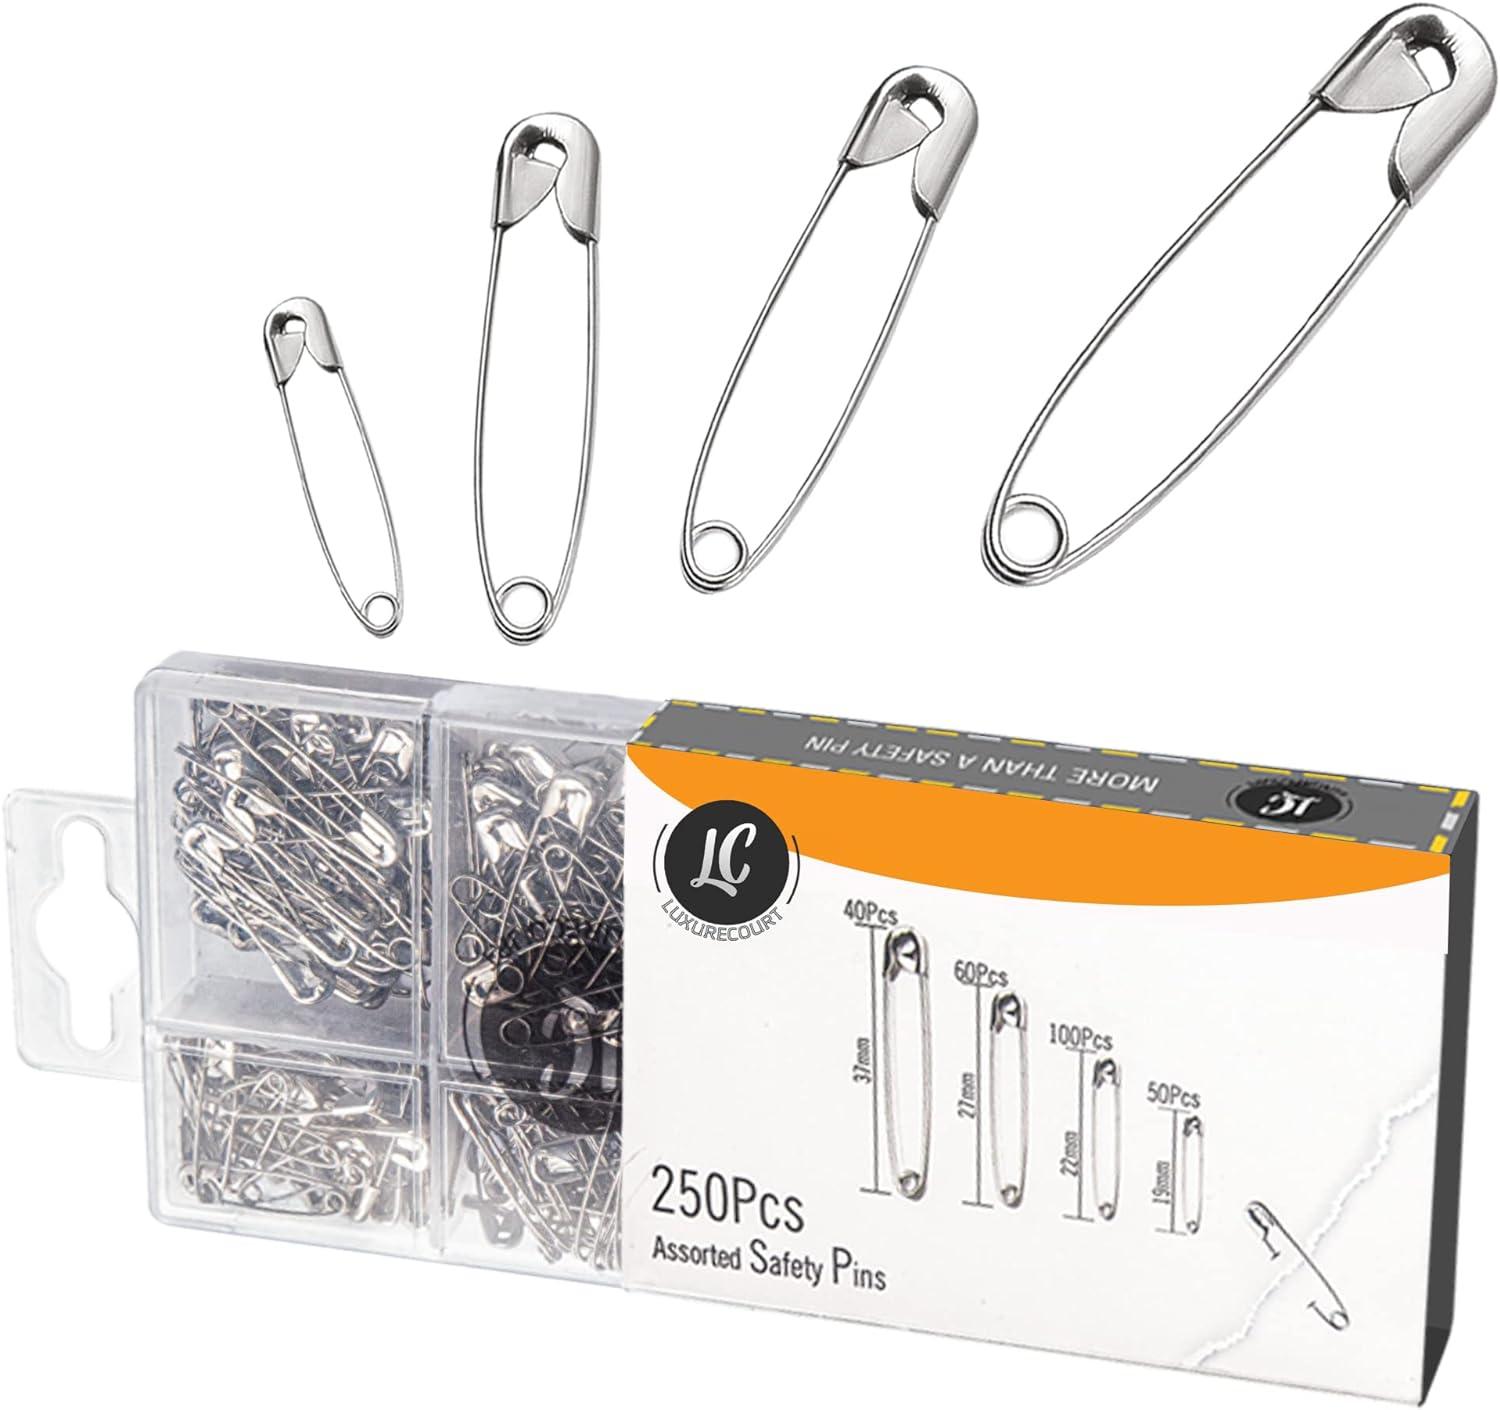 250 Pack Safety Pins by Luxurecourt, 4 Assorted Sizes of Durable, Silver  Small and Large Safety Pins Bulk, Rust-Resistant Nickel Plated Steel, Sharp